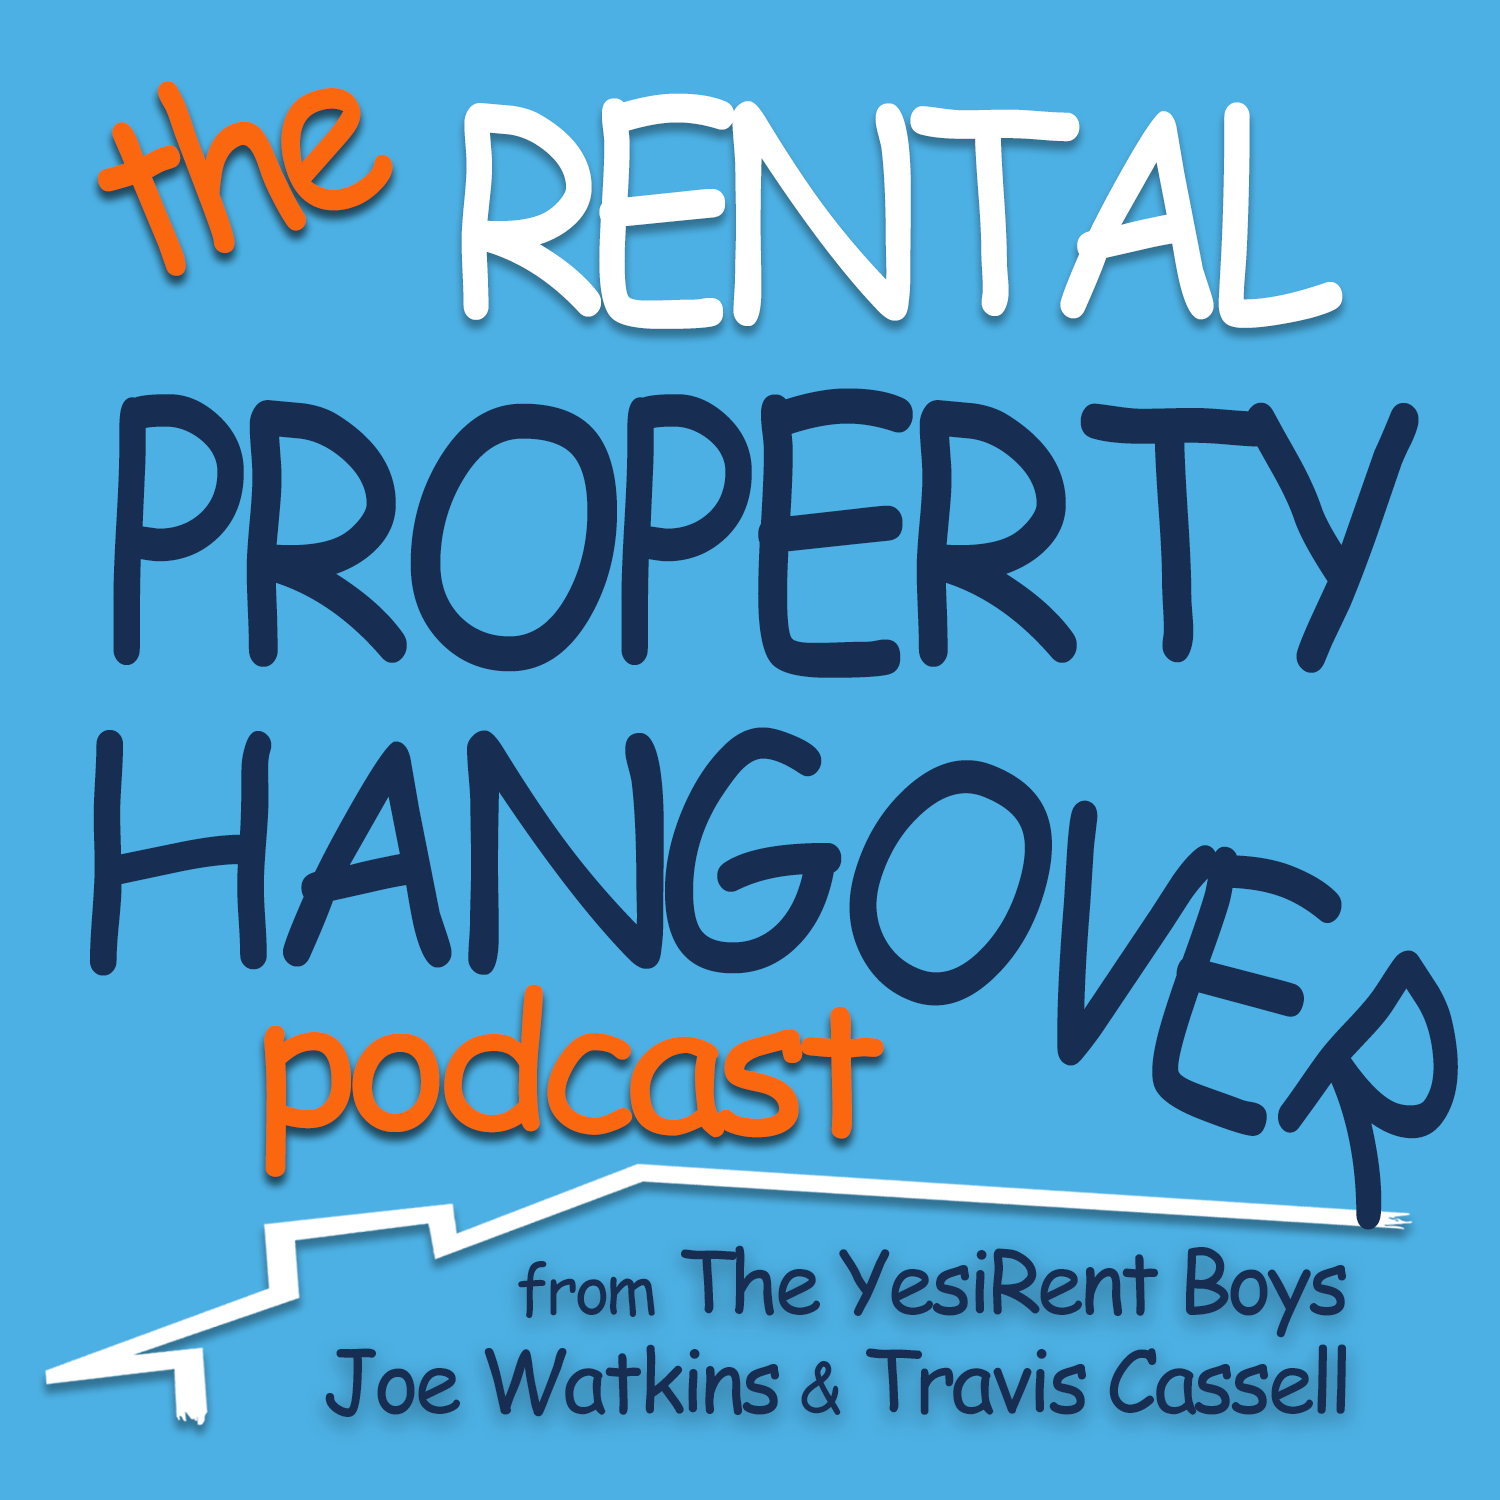 Artwork for podcast The Rental Property Hangover Show